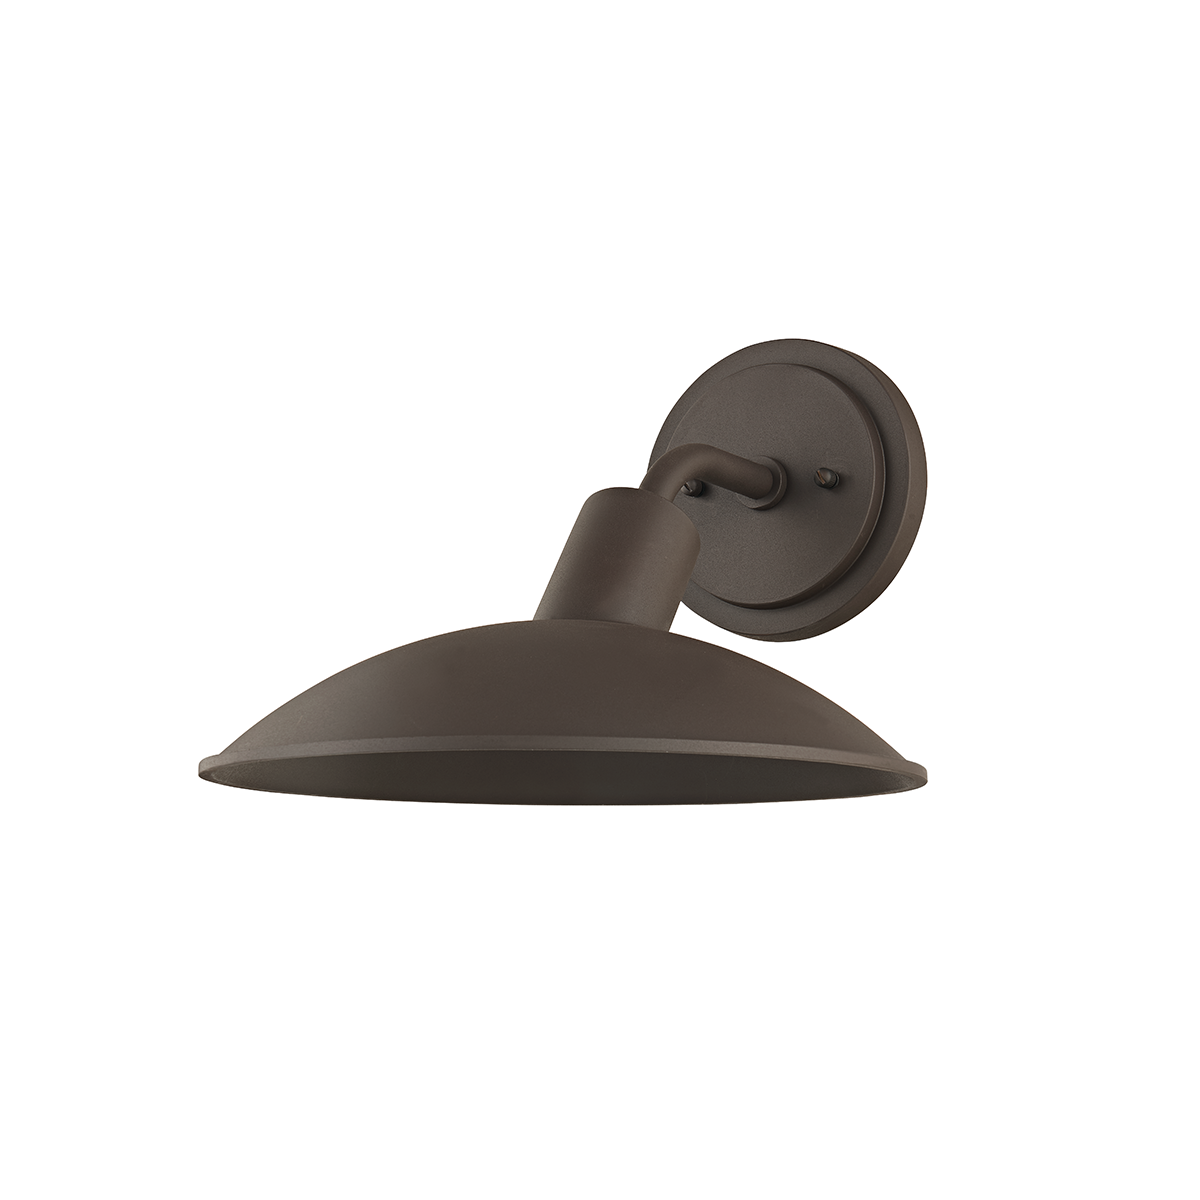 Troy Lighting 1 LIGHT SMALL EXTERIOR WALL SCONCE B8812 Outdoor l Wall Troy Lighting TEXTURED BRONZE  